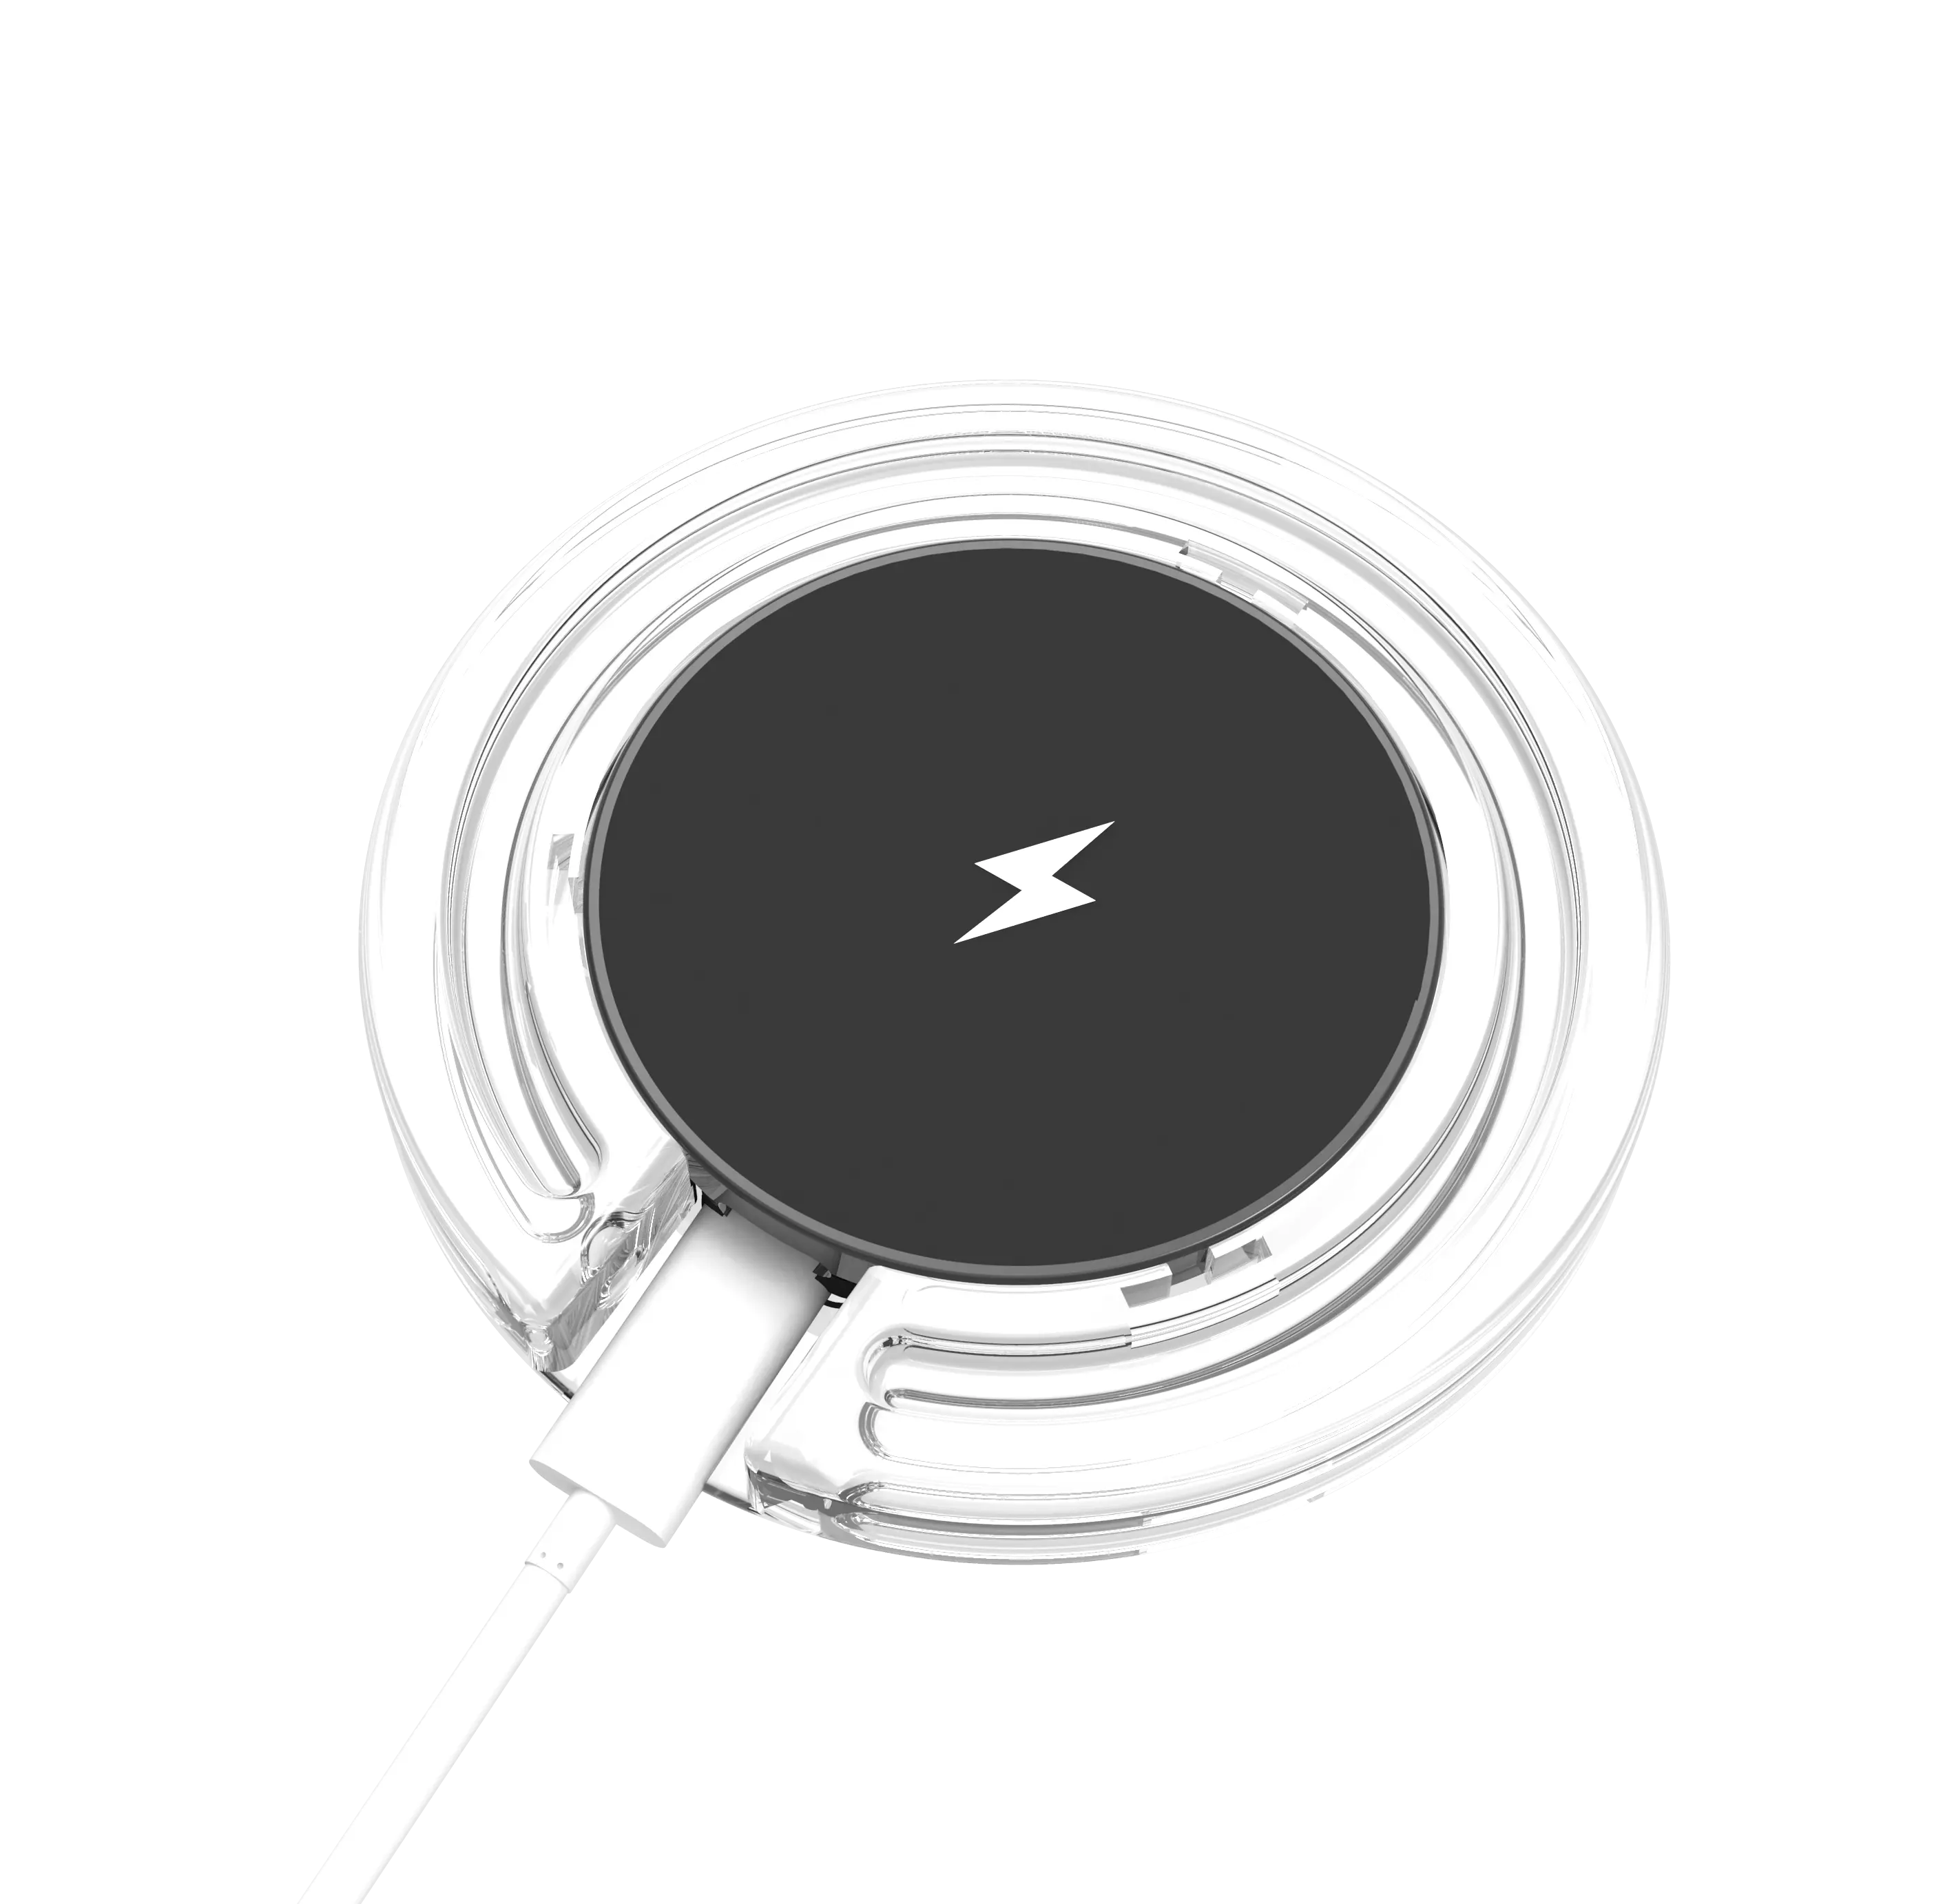 10mm Long Distance Induction Wireless Charger Charging with a Phone Case 10W Wireless Magnetic Charger Pad